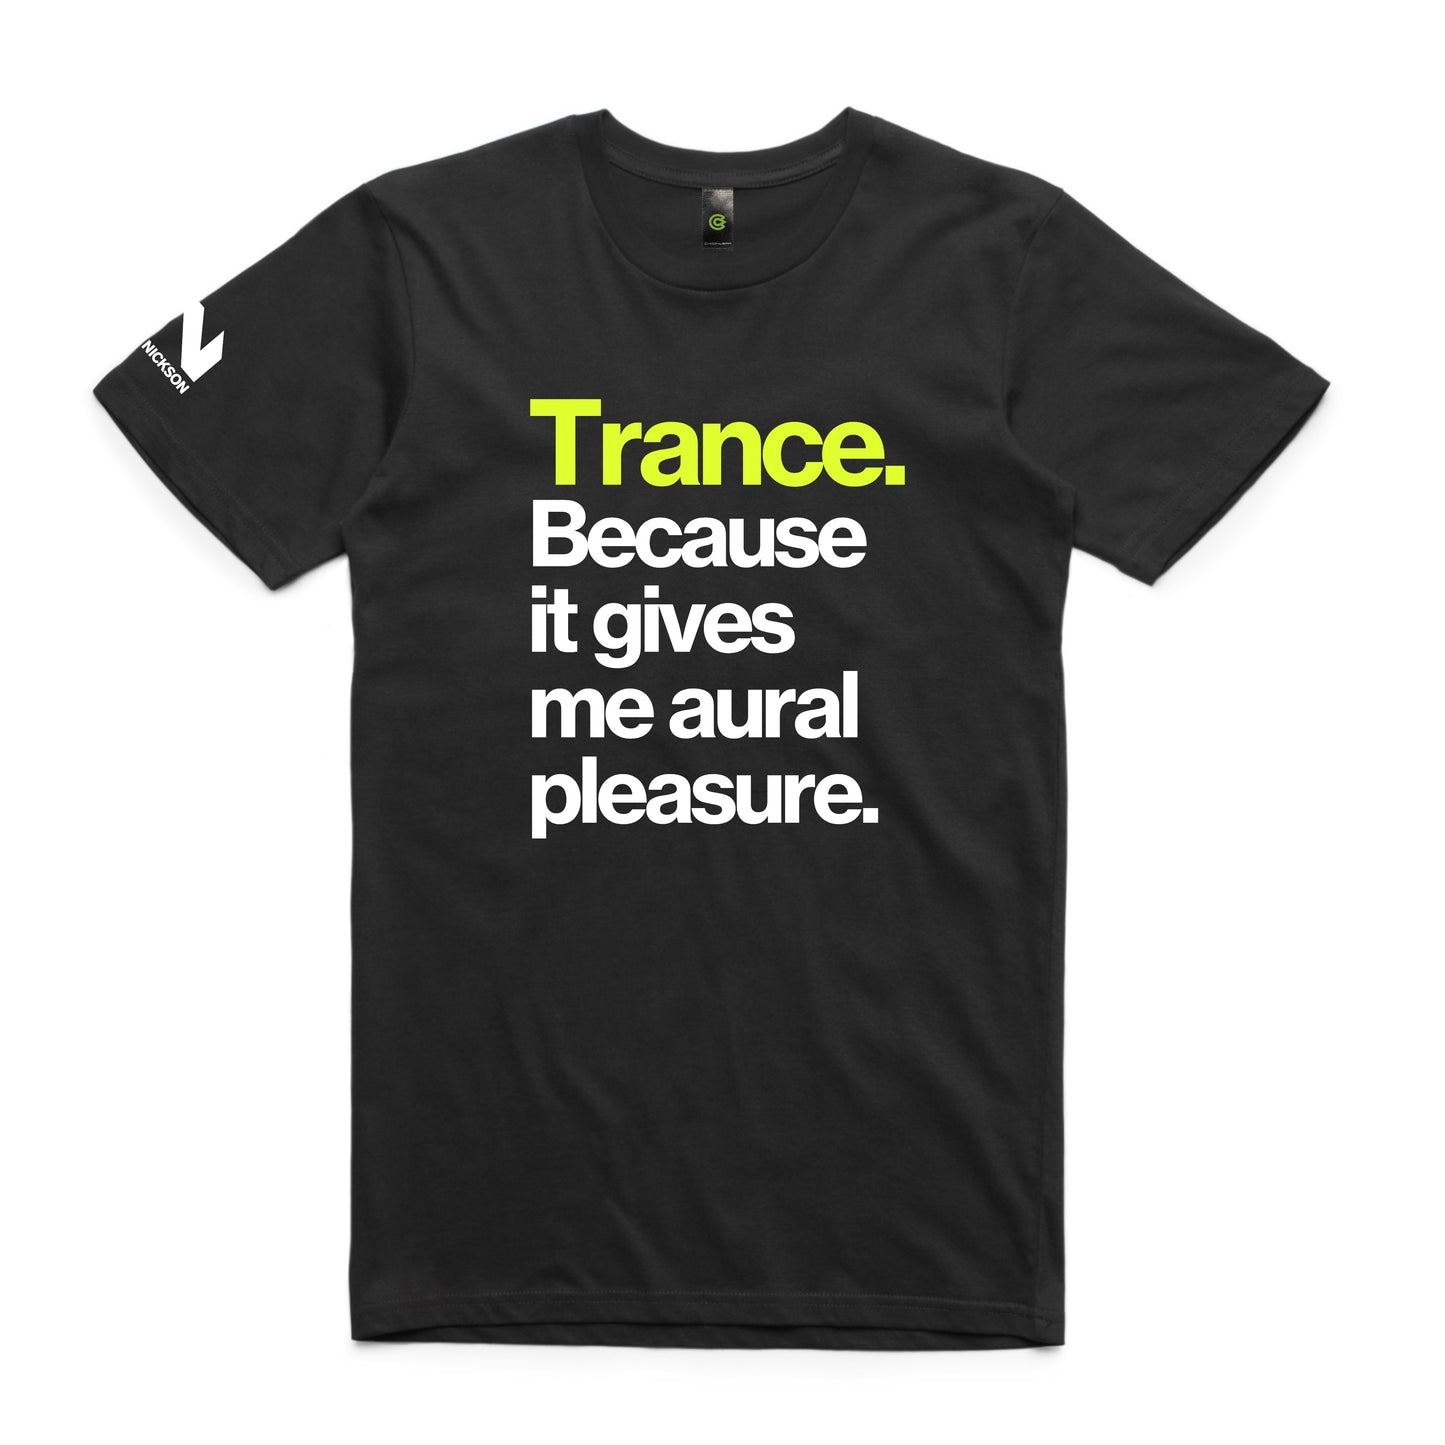 Trance Because Aural. Unisex Tee